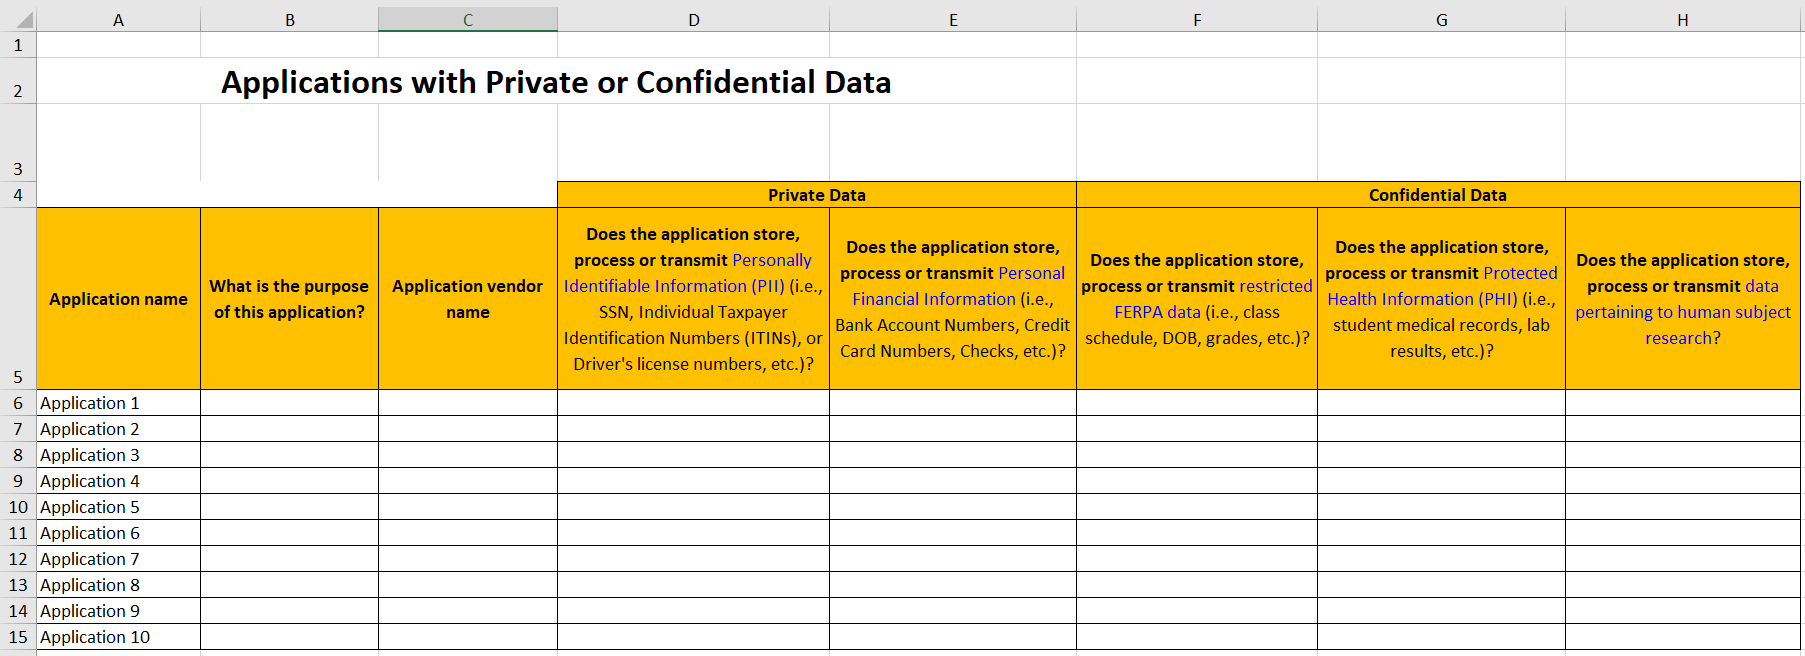 Tab 4 from the Information Access and Protection Plan Inventory Template 2019; Applications with Private or Confidential Data